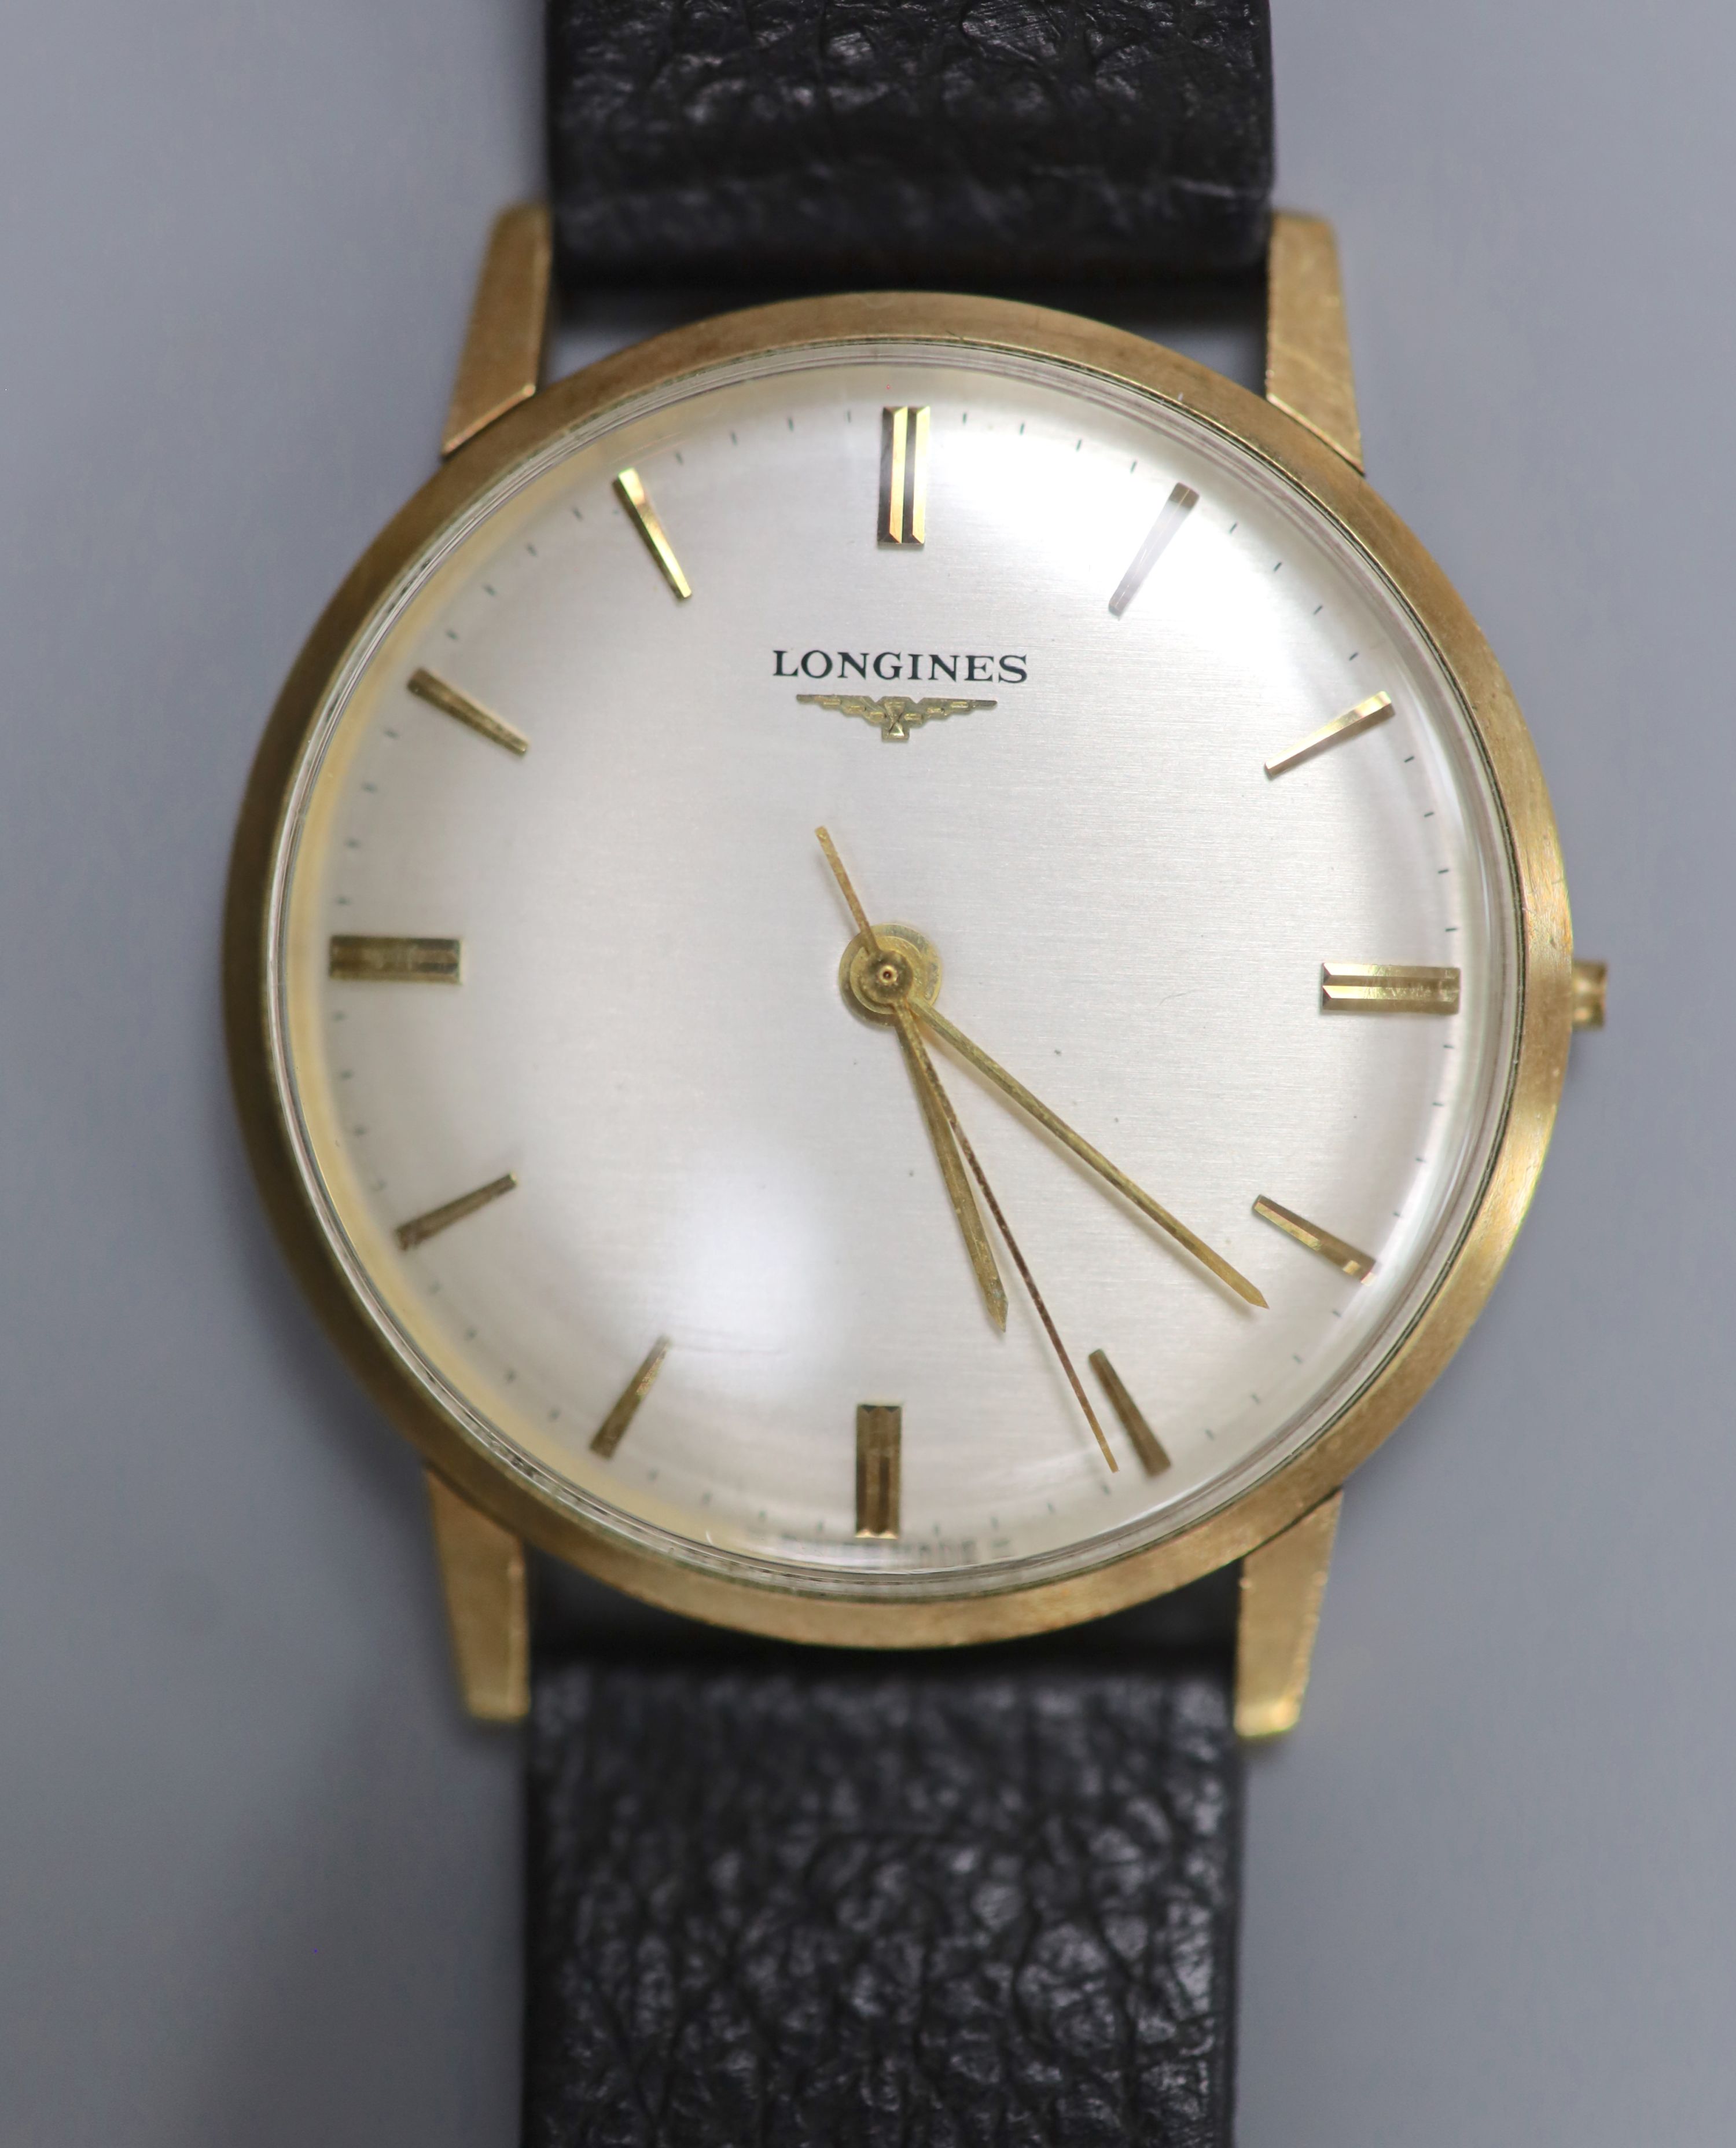 A gentleman's 1960's 9ct gold Longines manual wind wrist watch (lacking winding crown), with case back inscription.